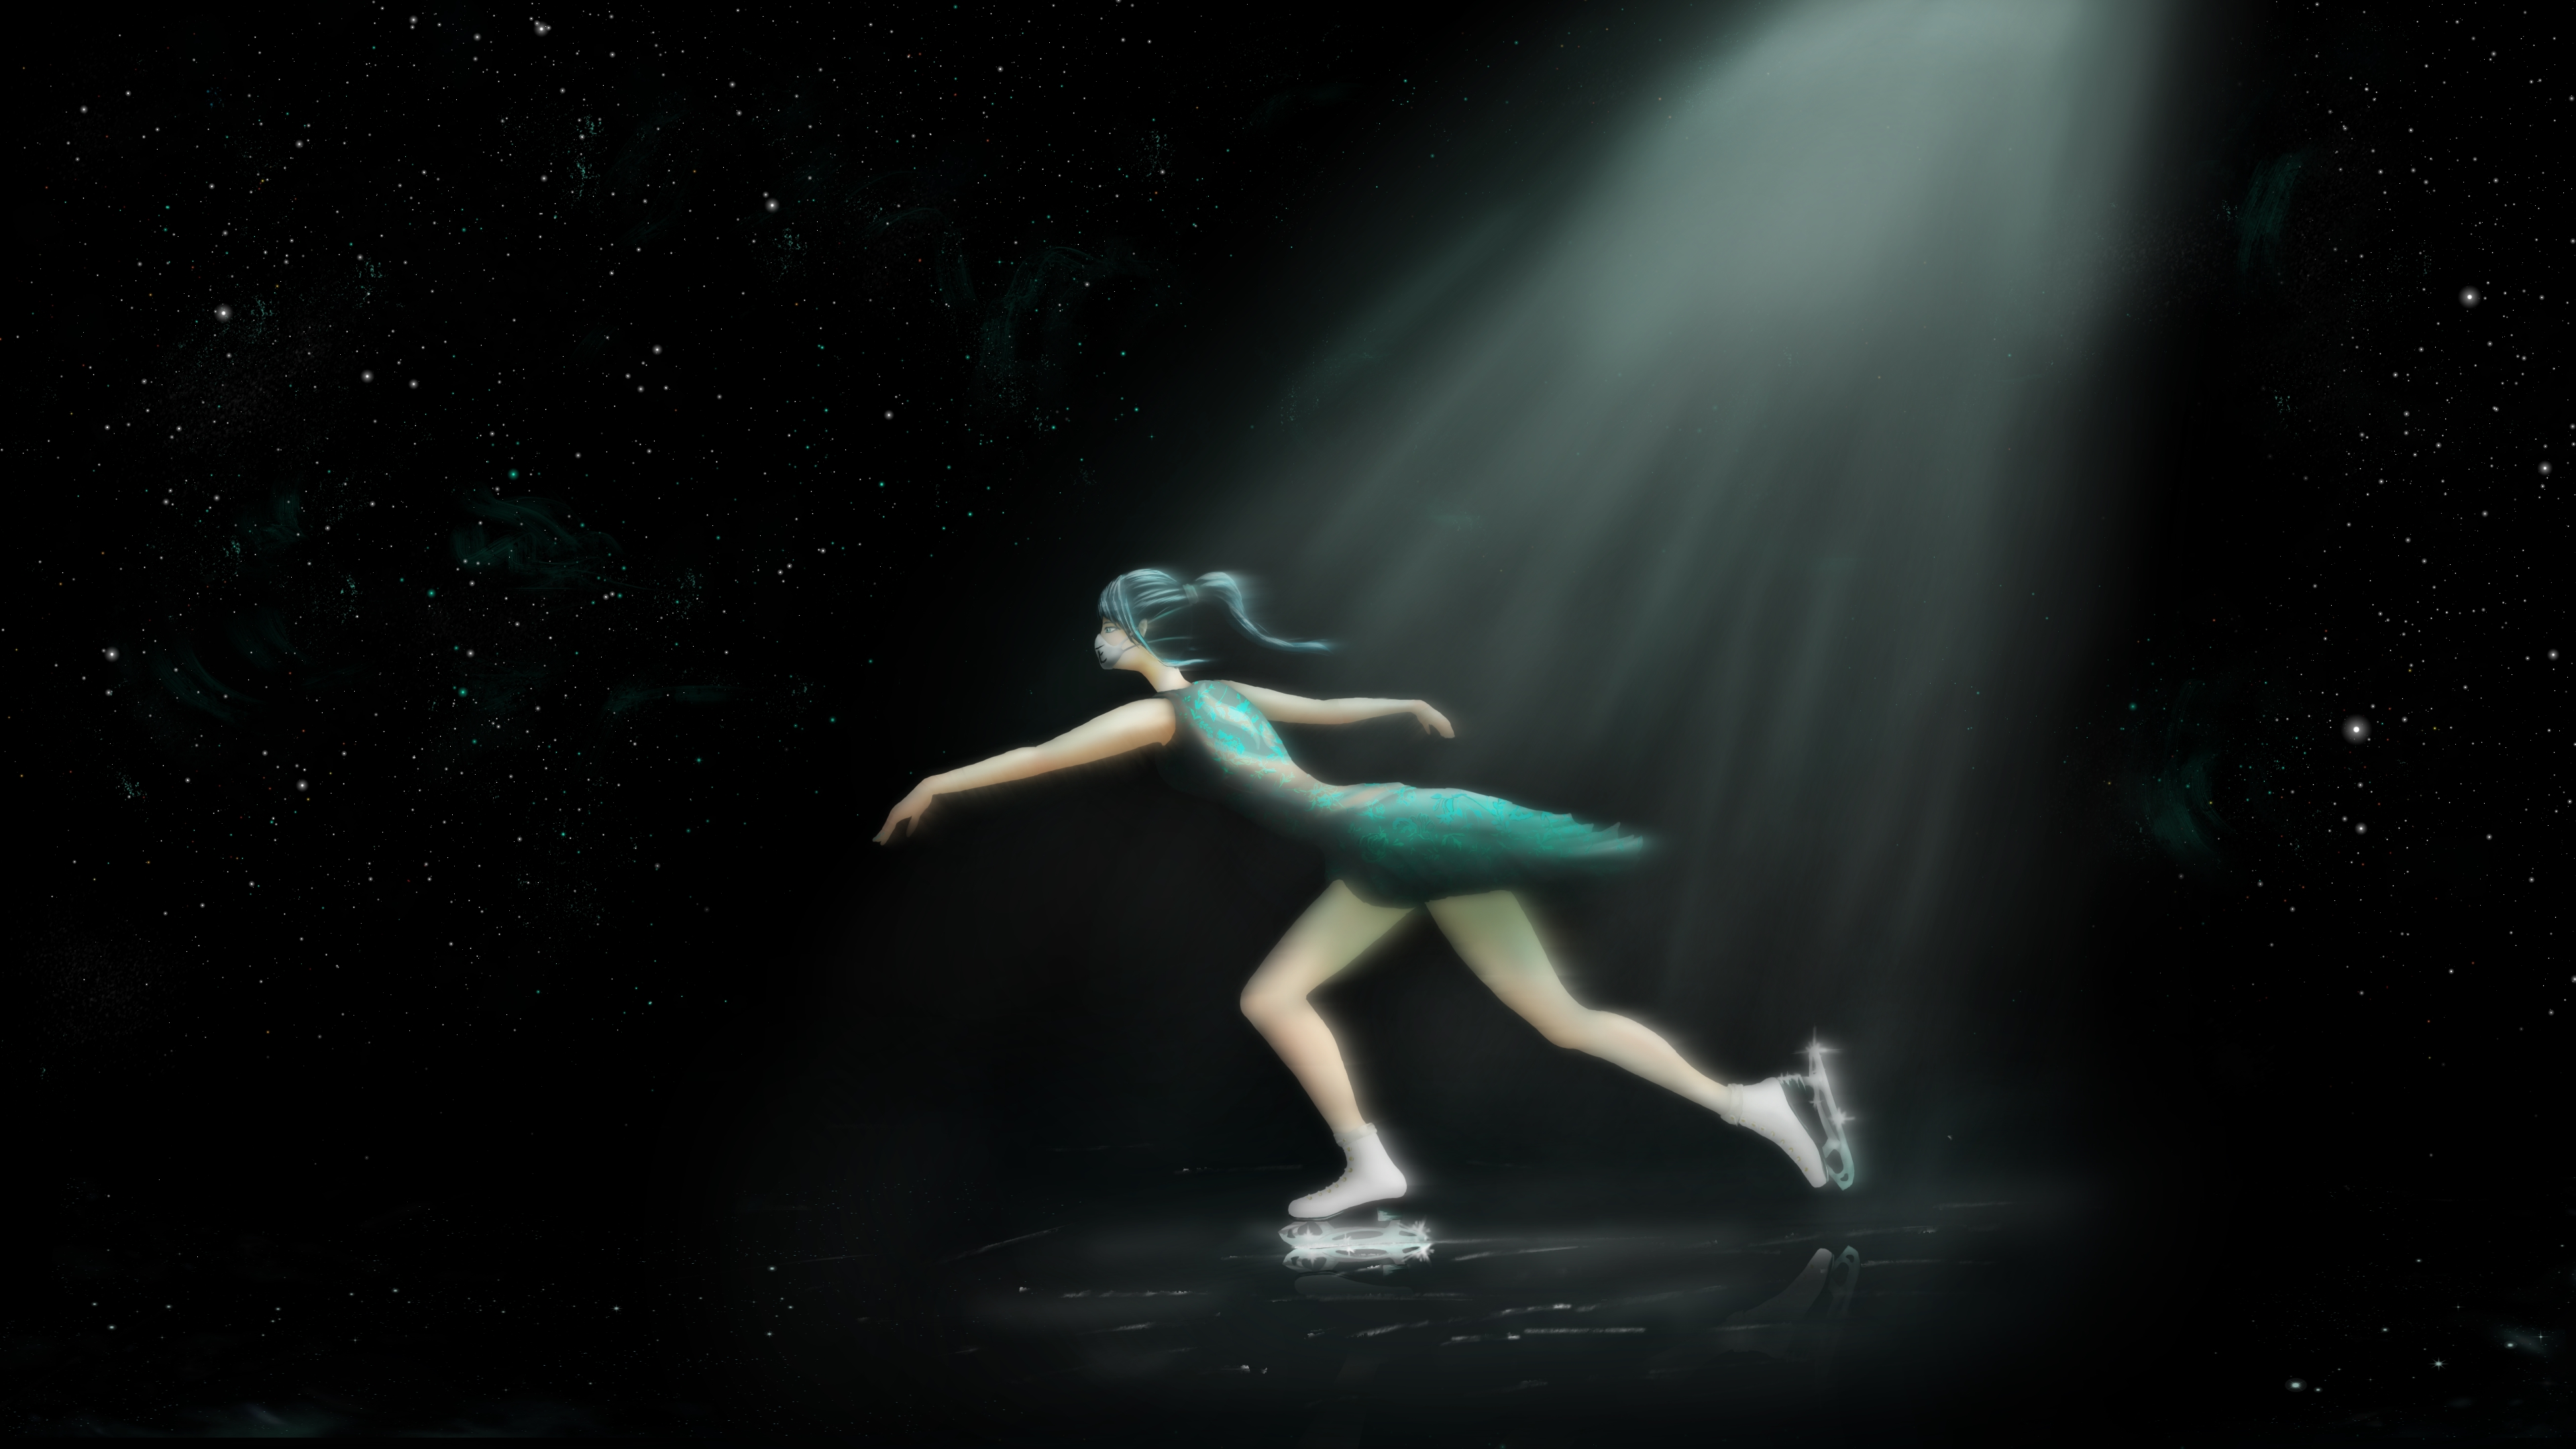 Ice skater by Orome